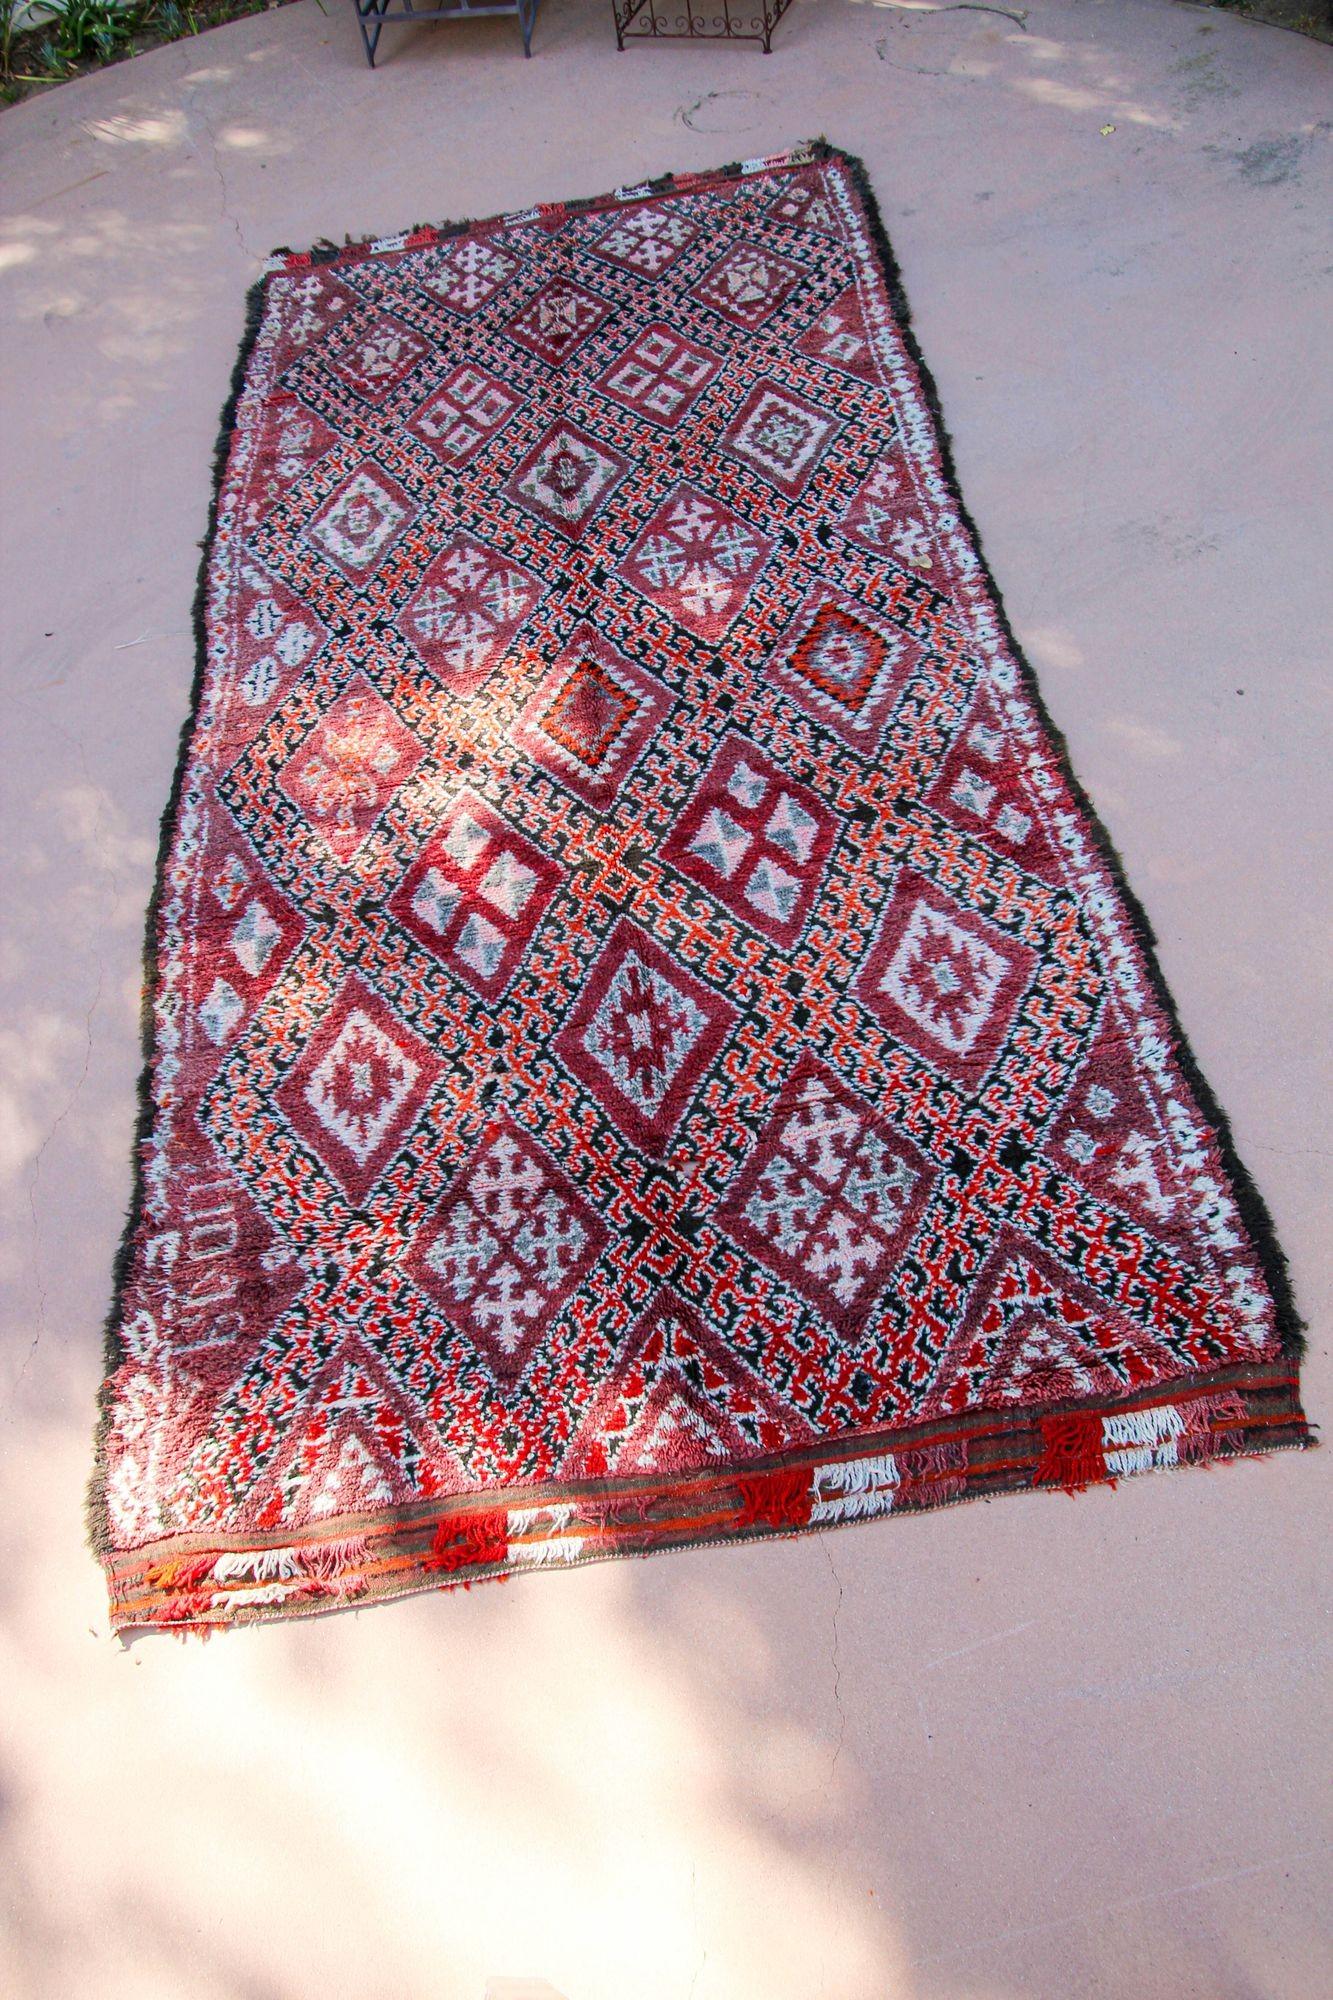 1960s Moroccan Berber rug with pink and black and white cors.From the plains of Marrakech, one of a kind vintage hand woven Rehmana Berber rug.Clector piece vibrant cors and asymmetrical compositions hand knotted hand-spun wo and natural dyes. For